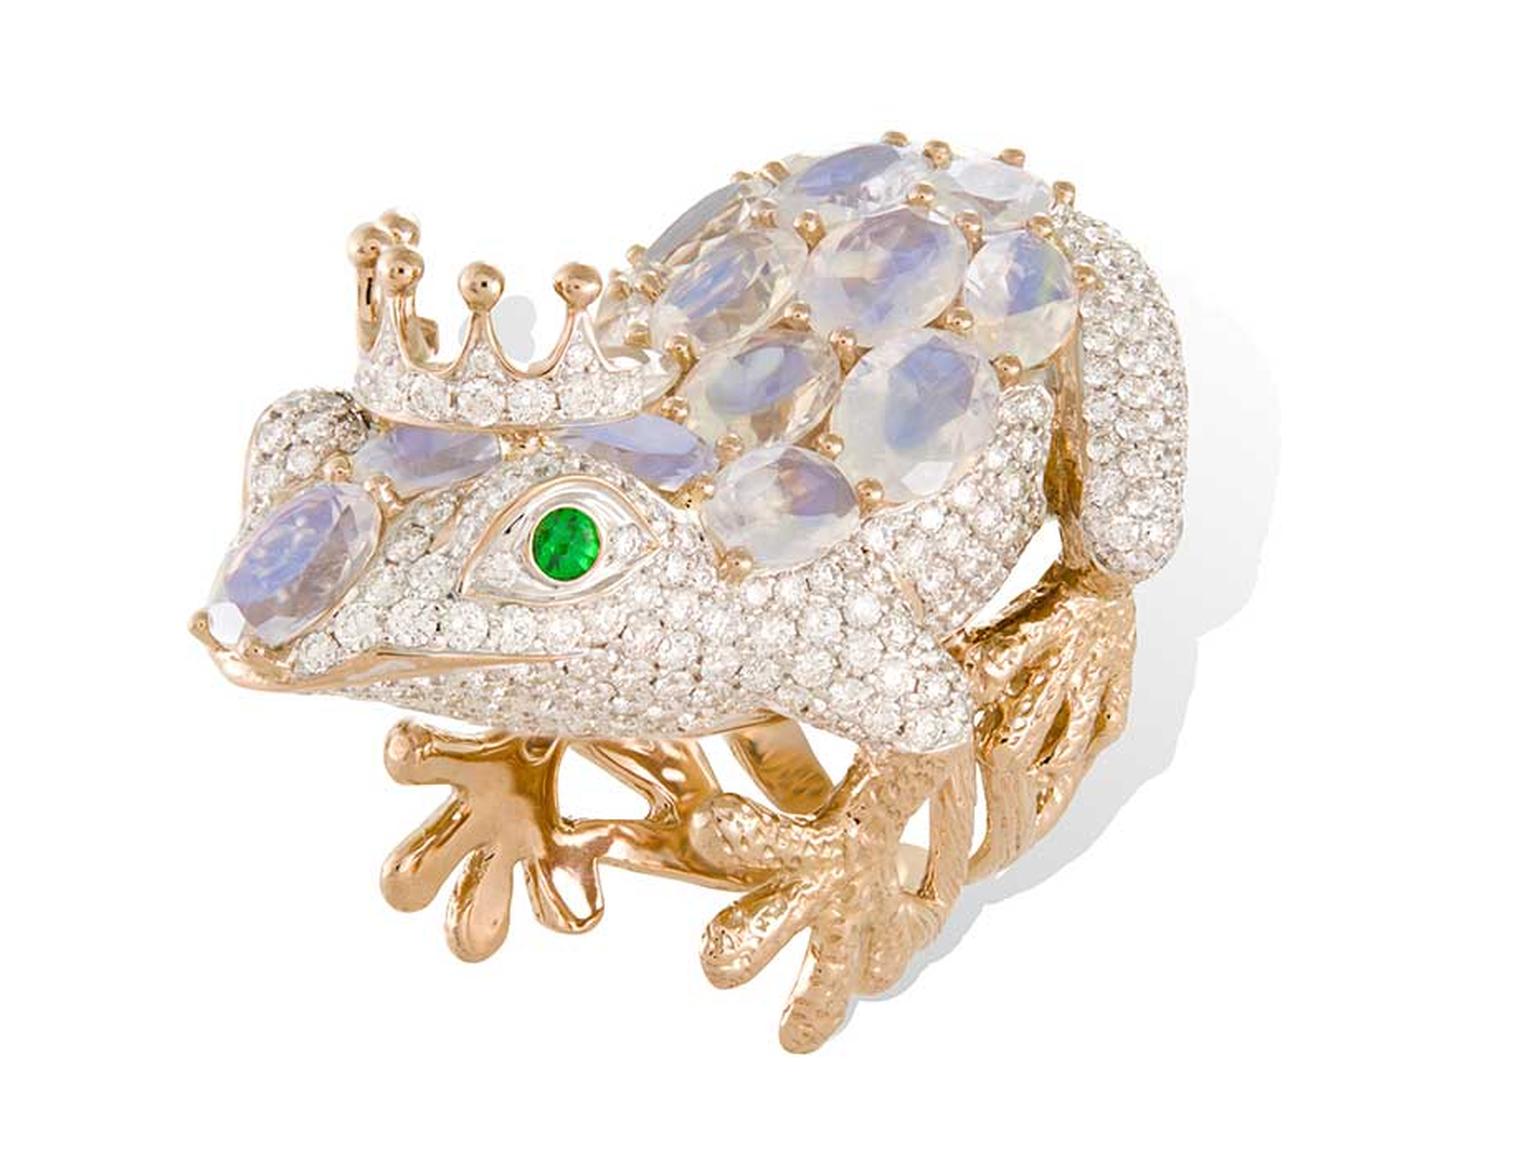 Lydia Courteille Frog ring in gold with diamonds, moonstones and emeralds for eyes.